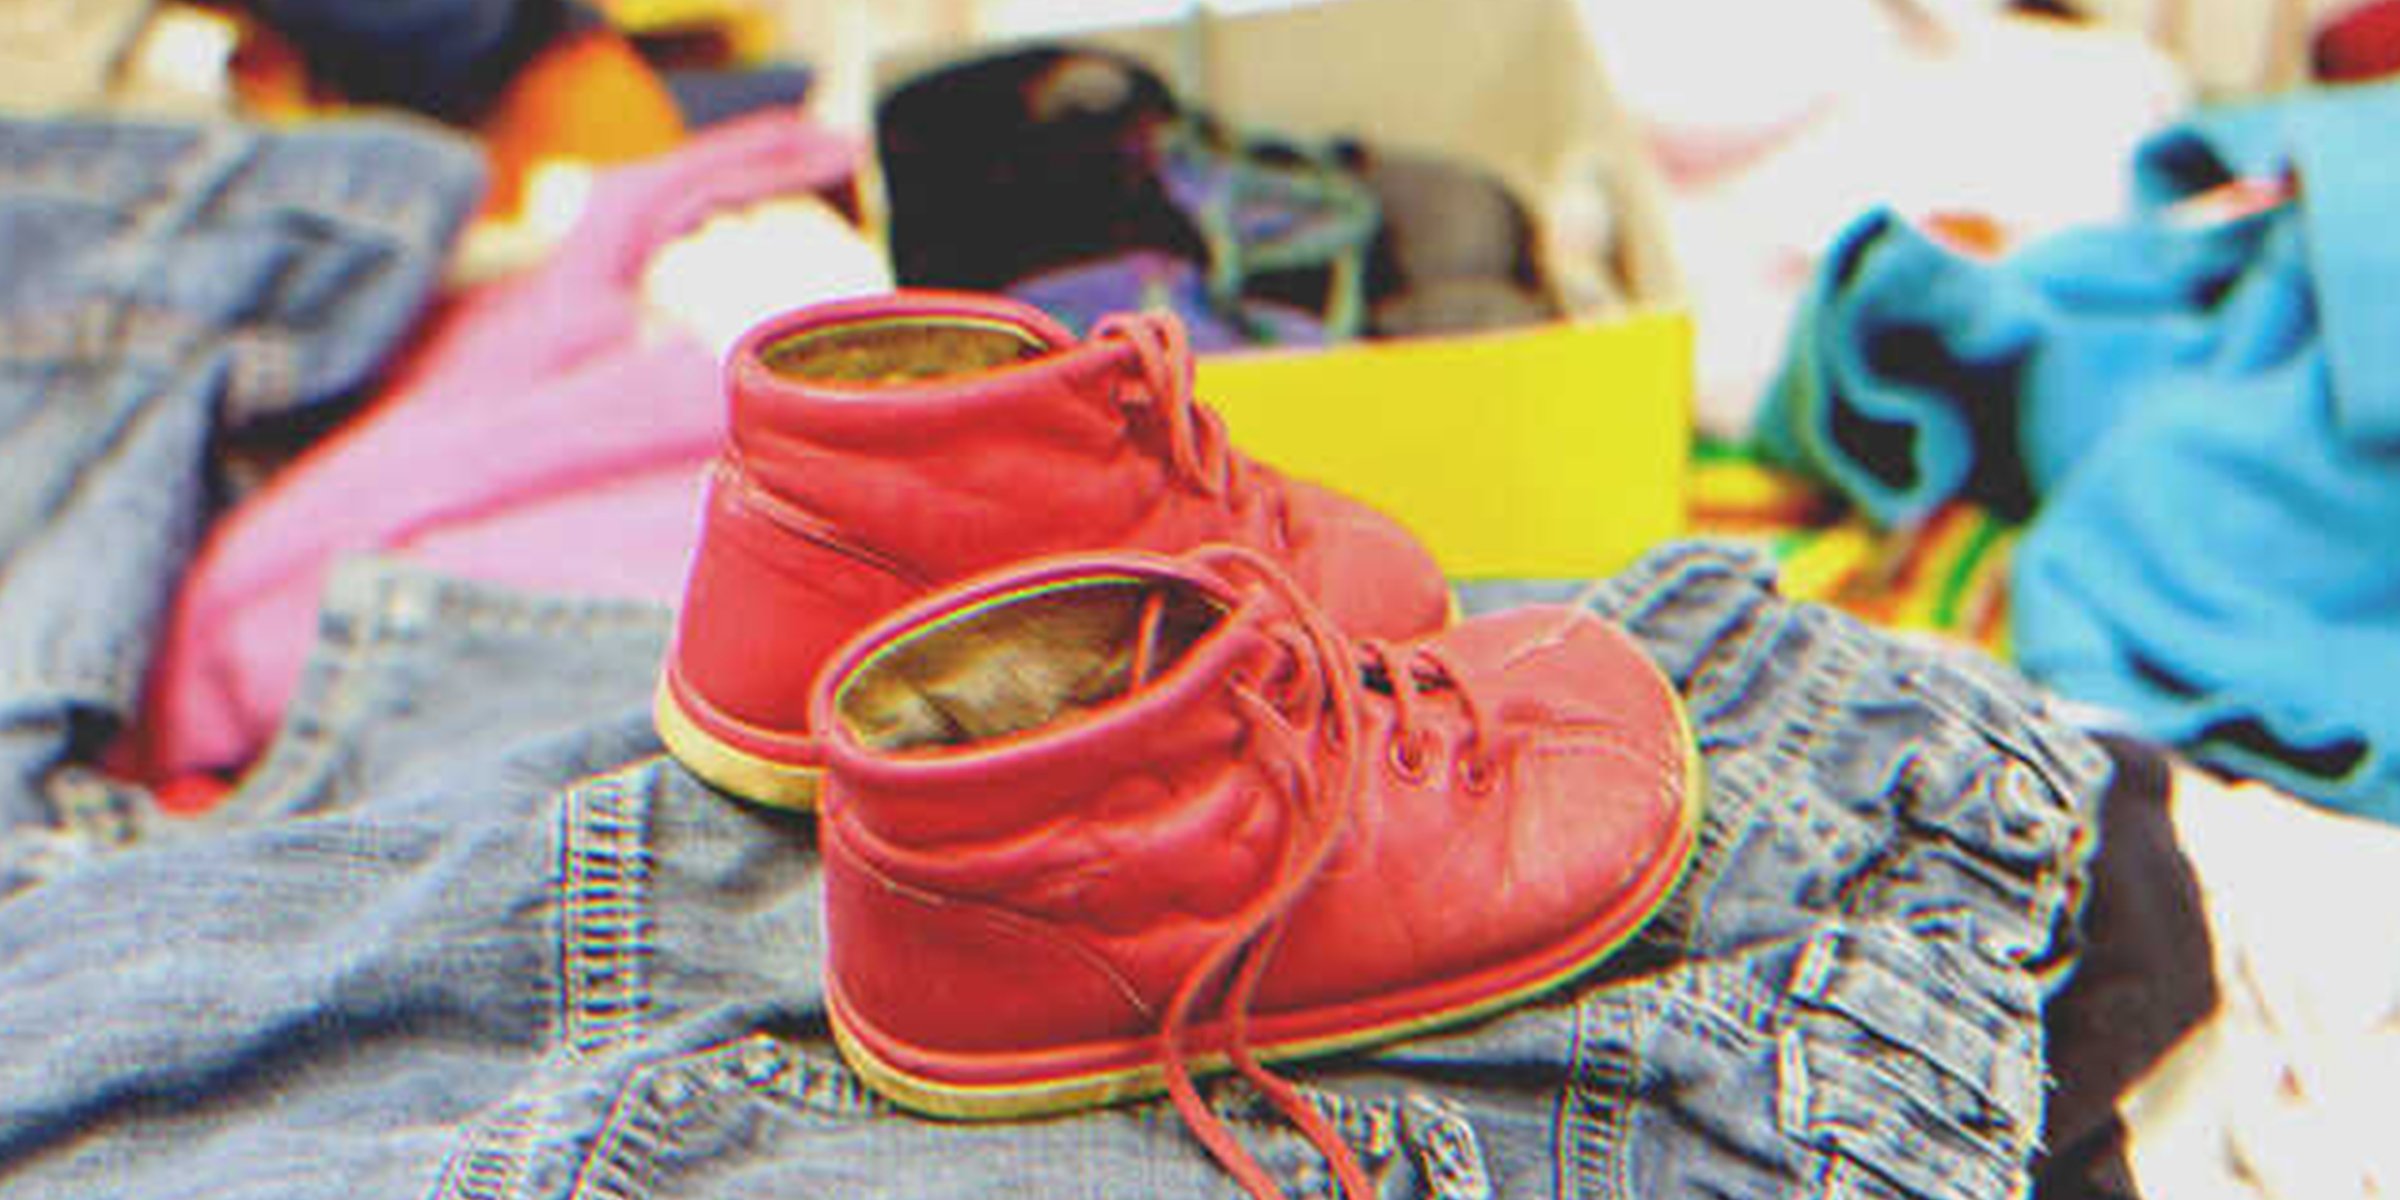 A pair of little red shoes | Source: Shutterstock